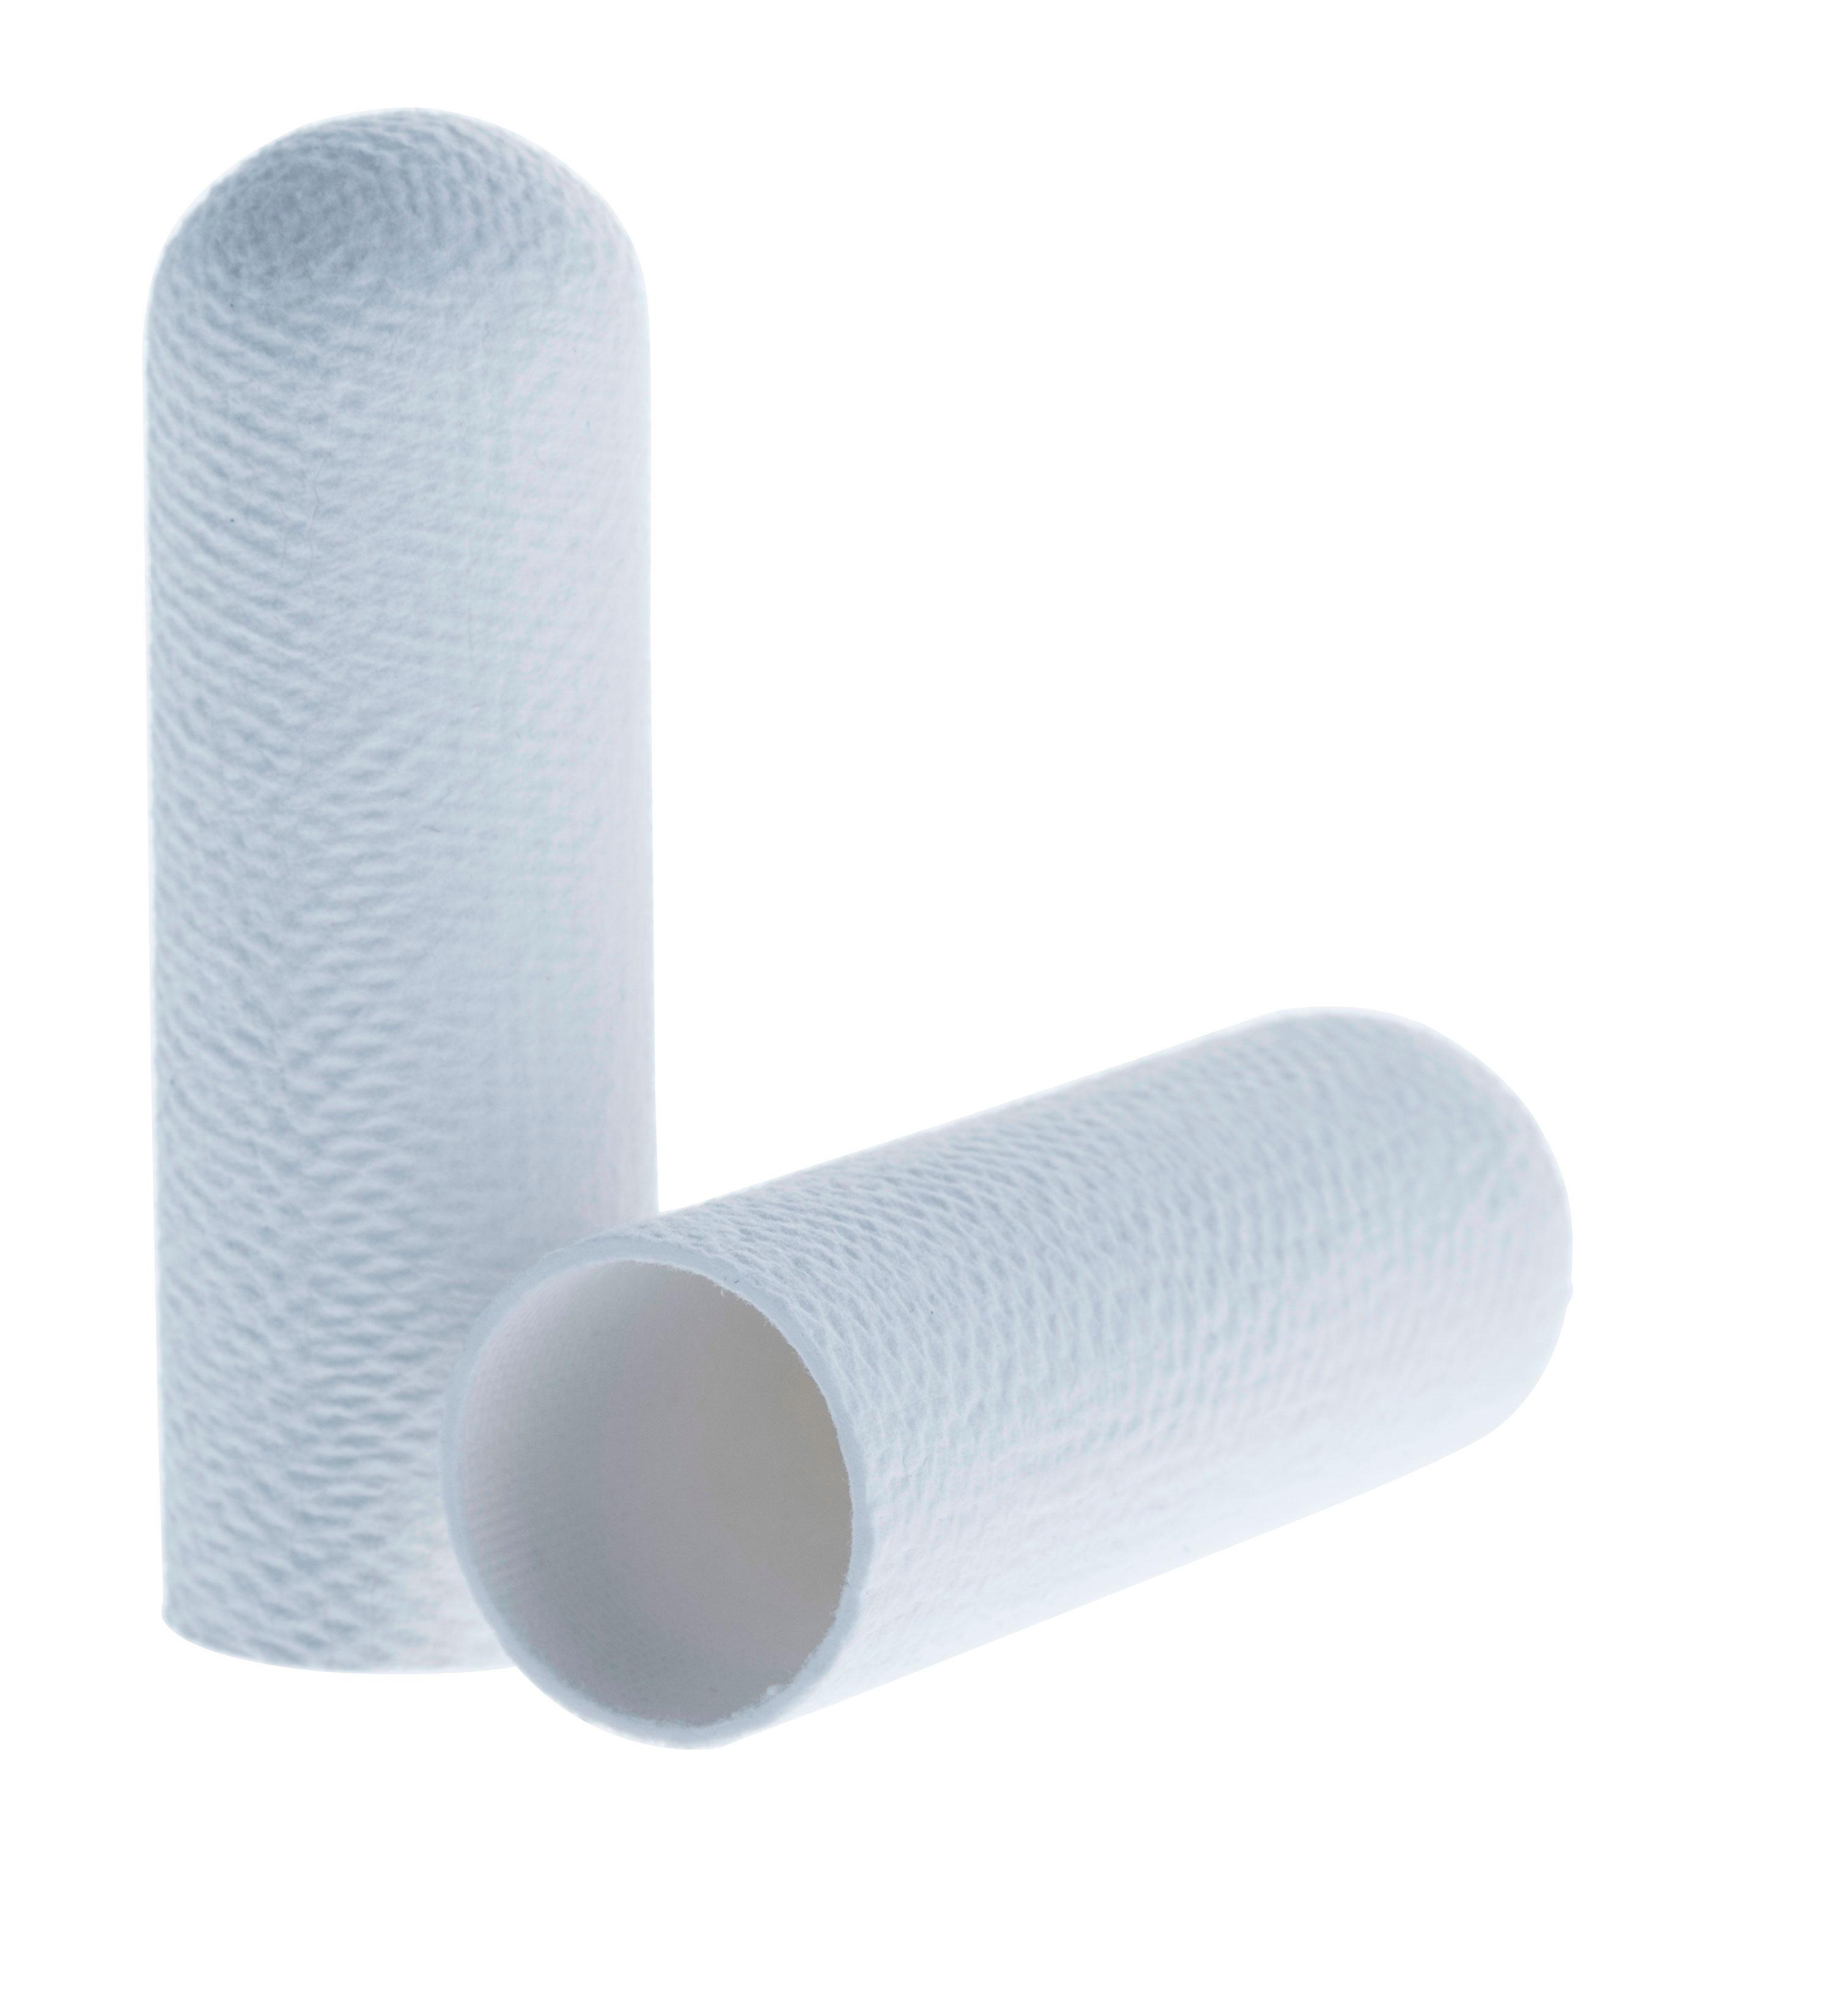 Cellulose extraction thimbles for Soxhlet extraction. SCHARLAU. Standard cellulose cartridge. Dim. Øxlength: 25x60mm. Particle retention in liquid: Nom. 8-15 microns